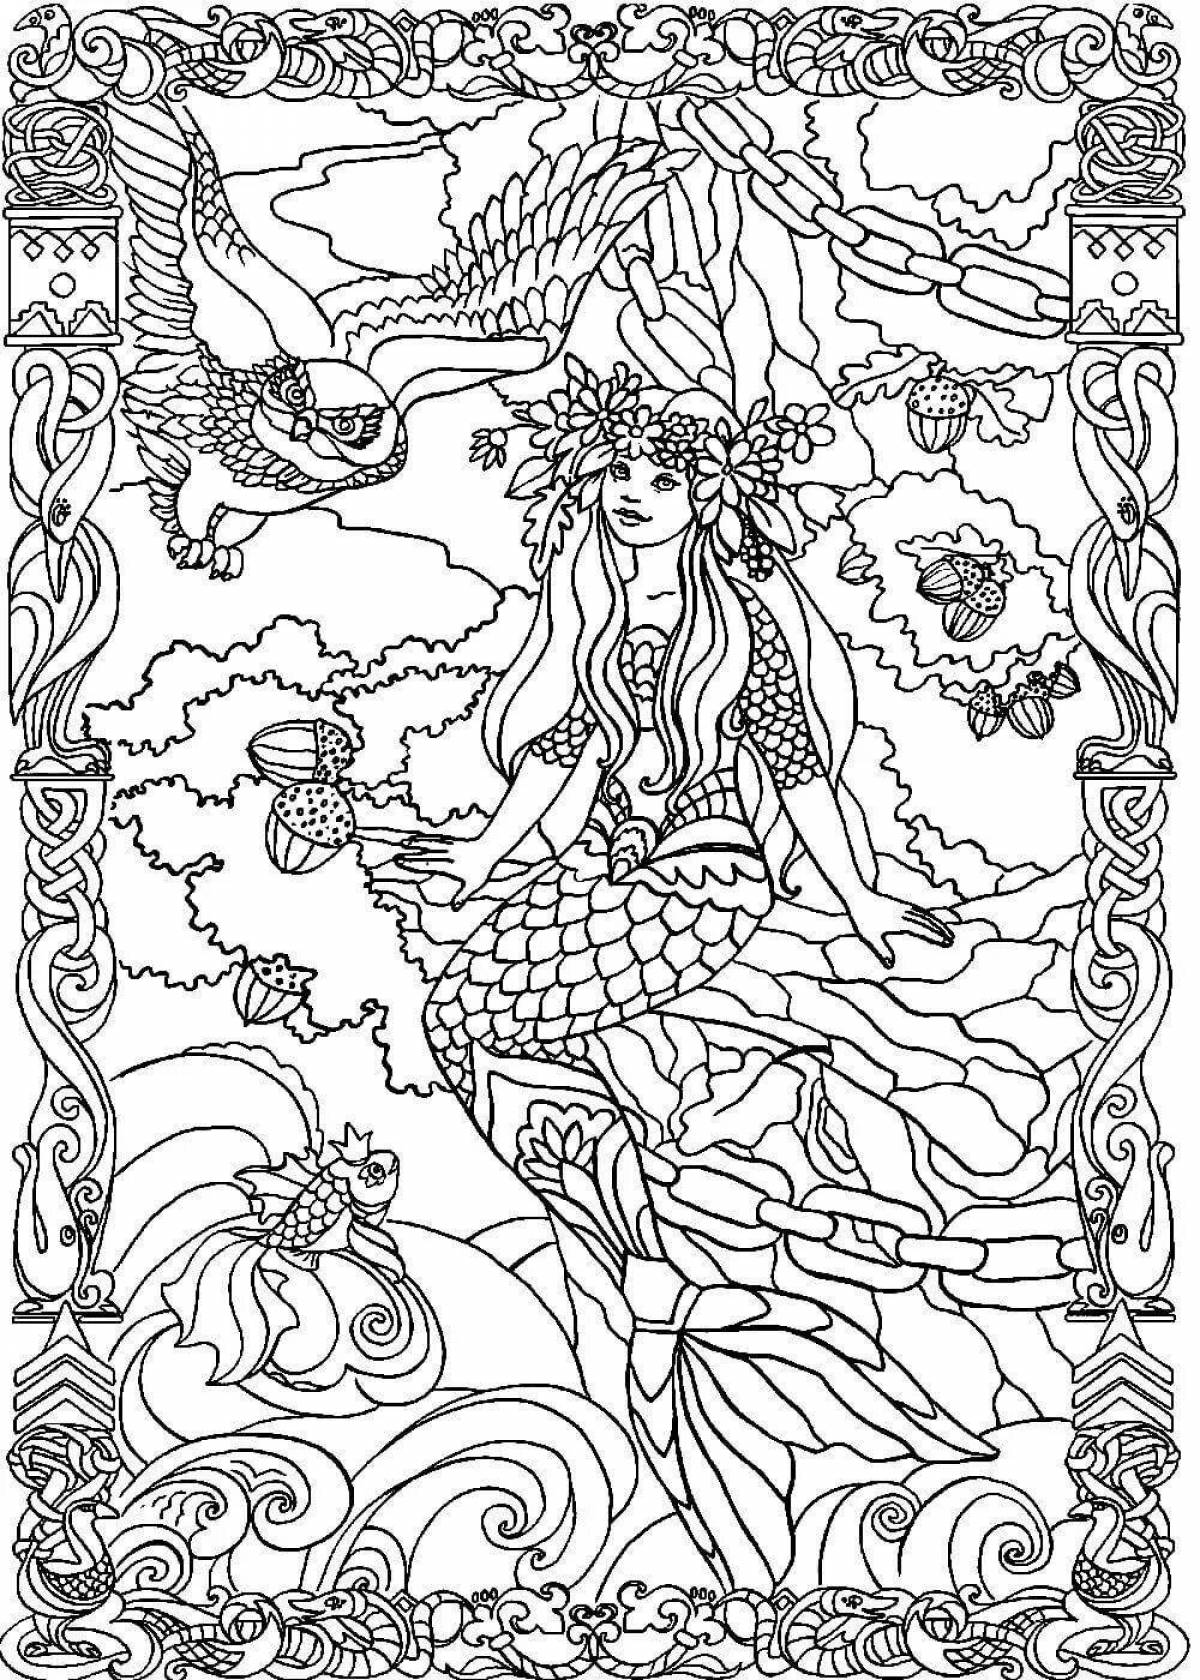 Fancy coloring book based on Pushkin's fairy tales